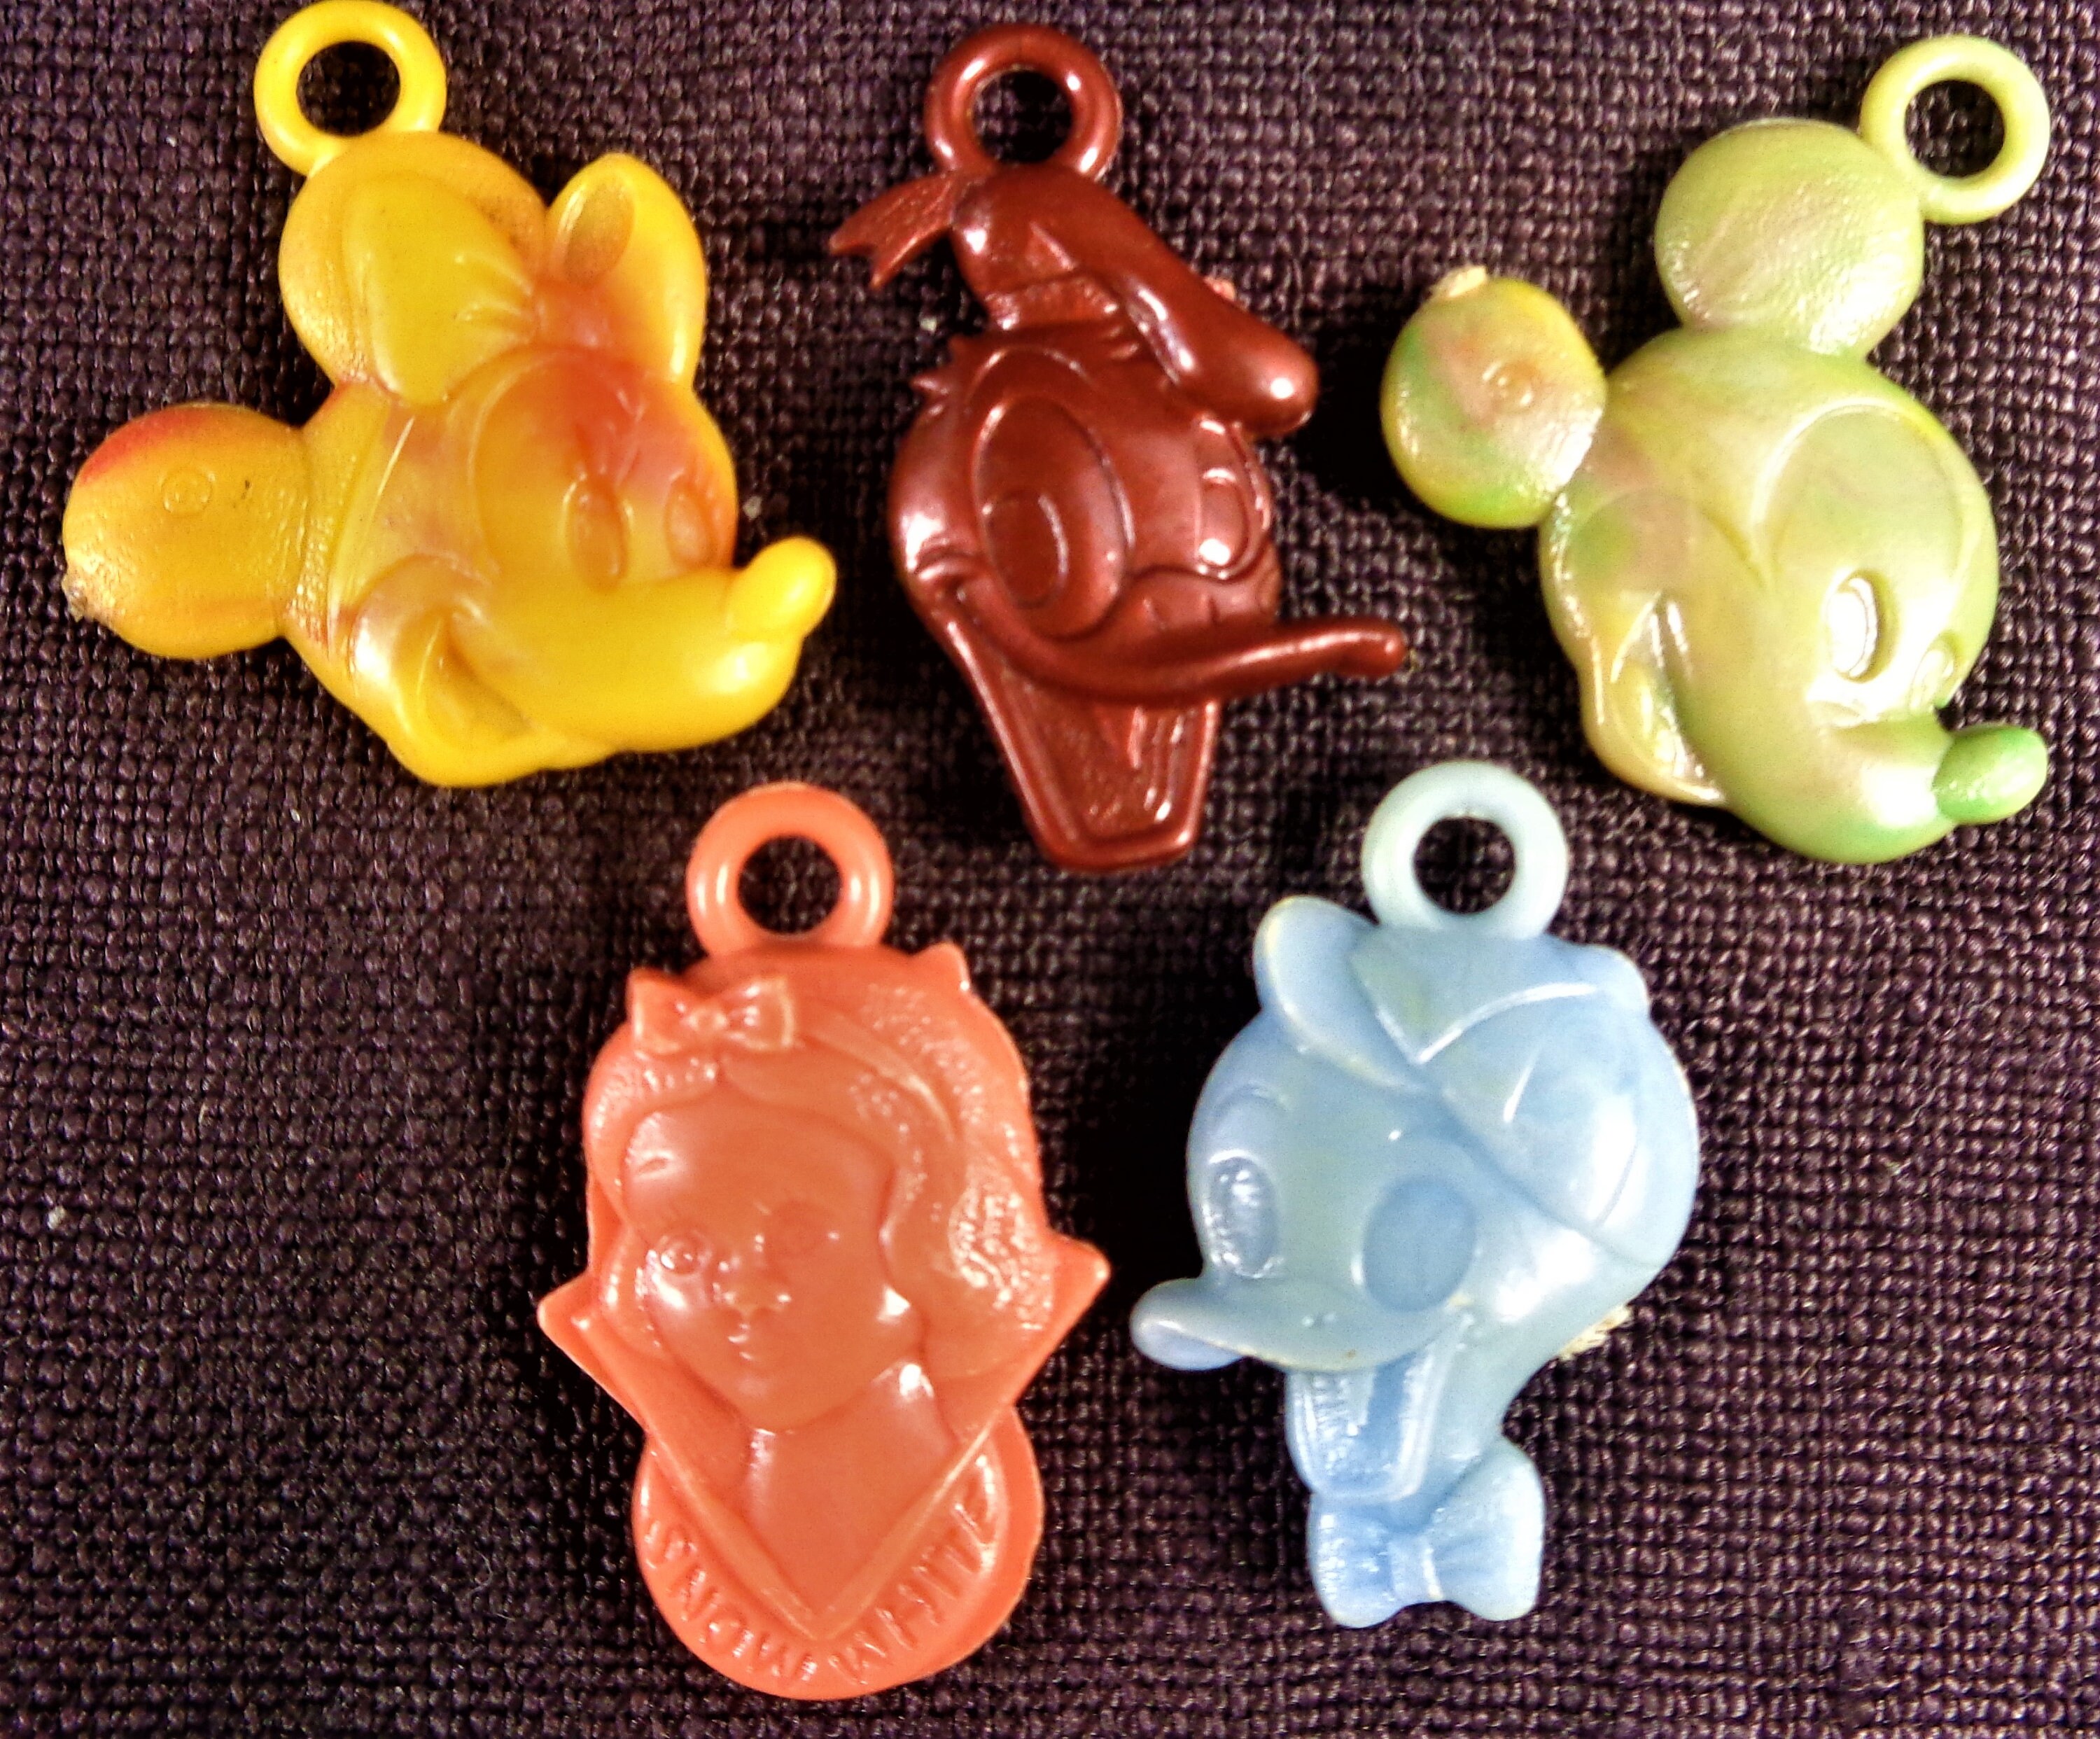 BixleyVintage Vintage Celluloid Cracker Jack Charms | Colorful Plastic Charms with Metal Loops | Pegasus, Rooster, Mickey Mouse, Gargoyle, & Song Bird 4